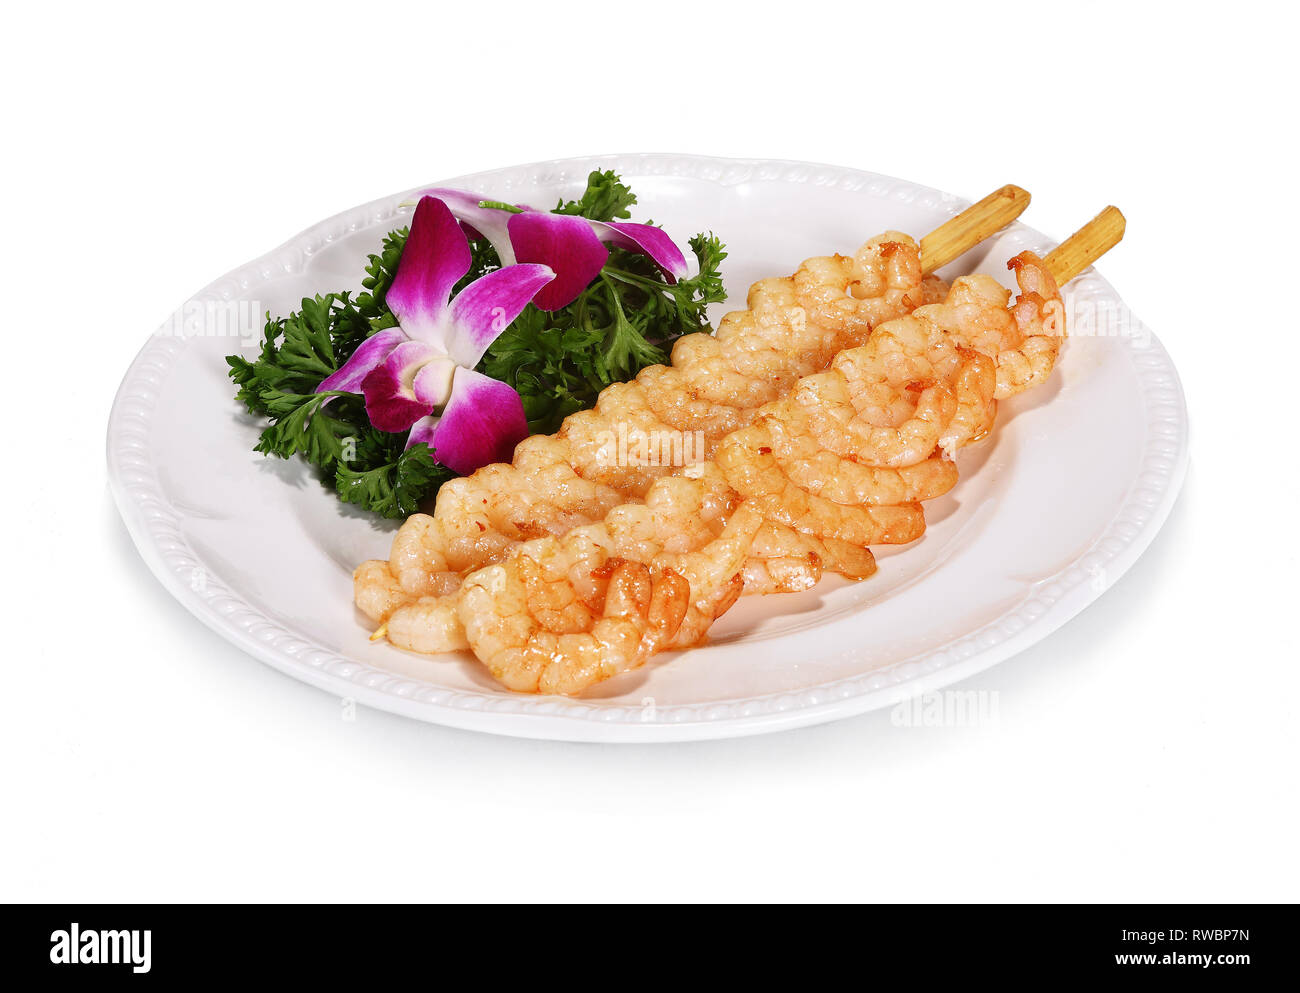 Shrimp skewers according to Chinese tradition. Served on a white plate with salad decoration. Stock Photo